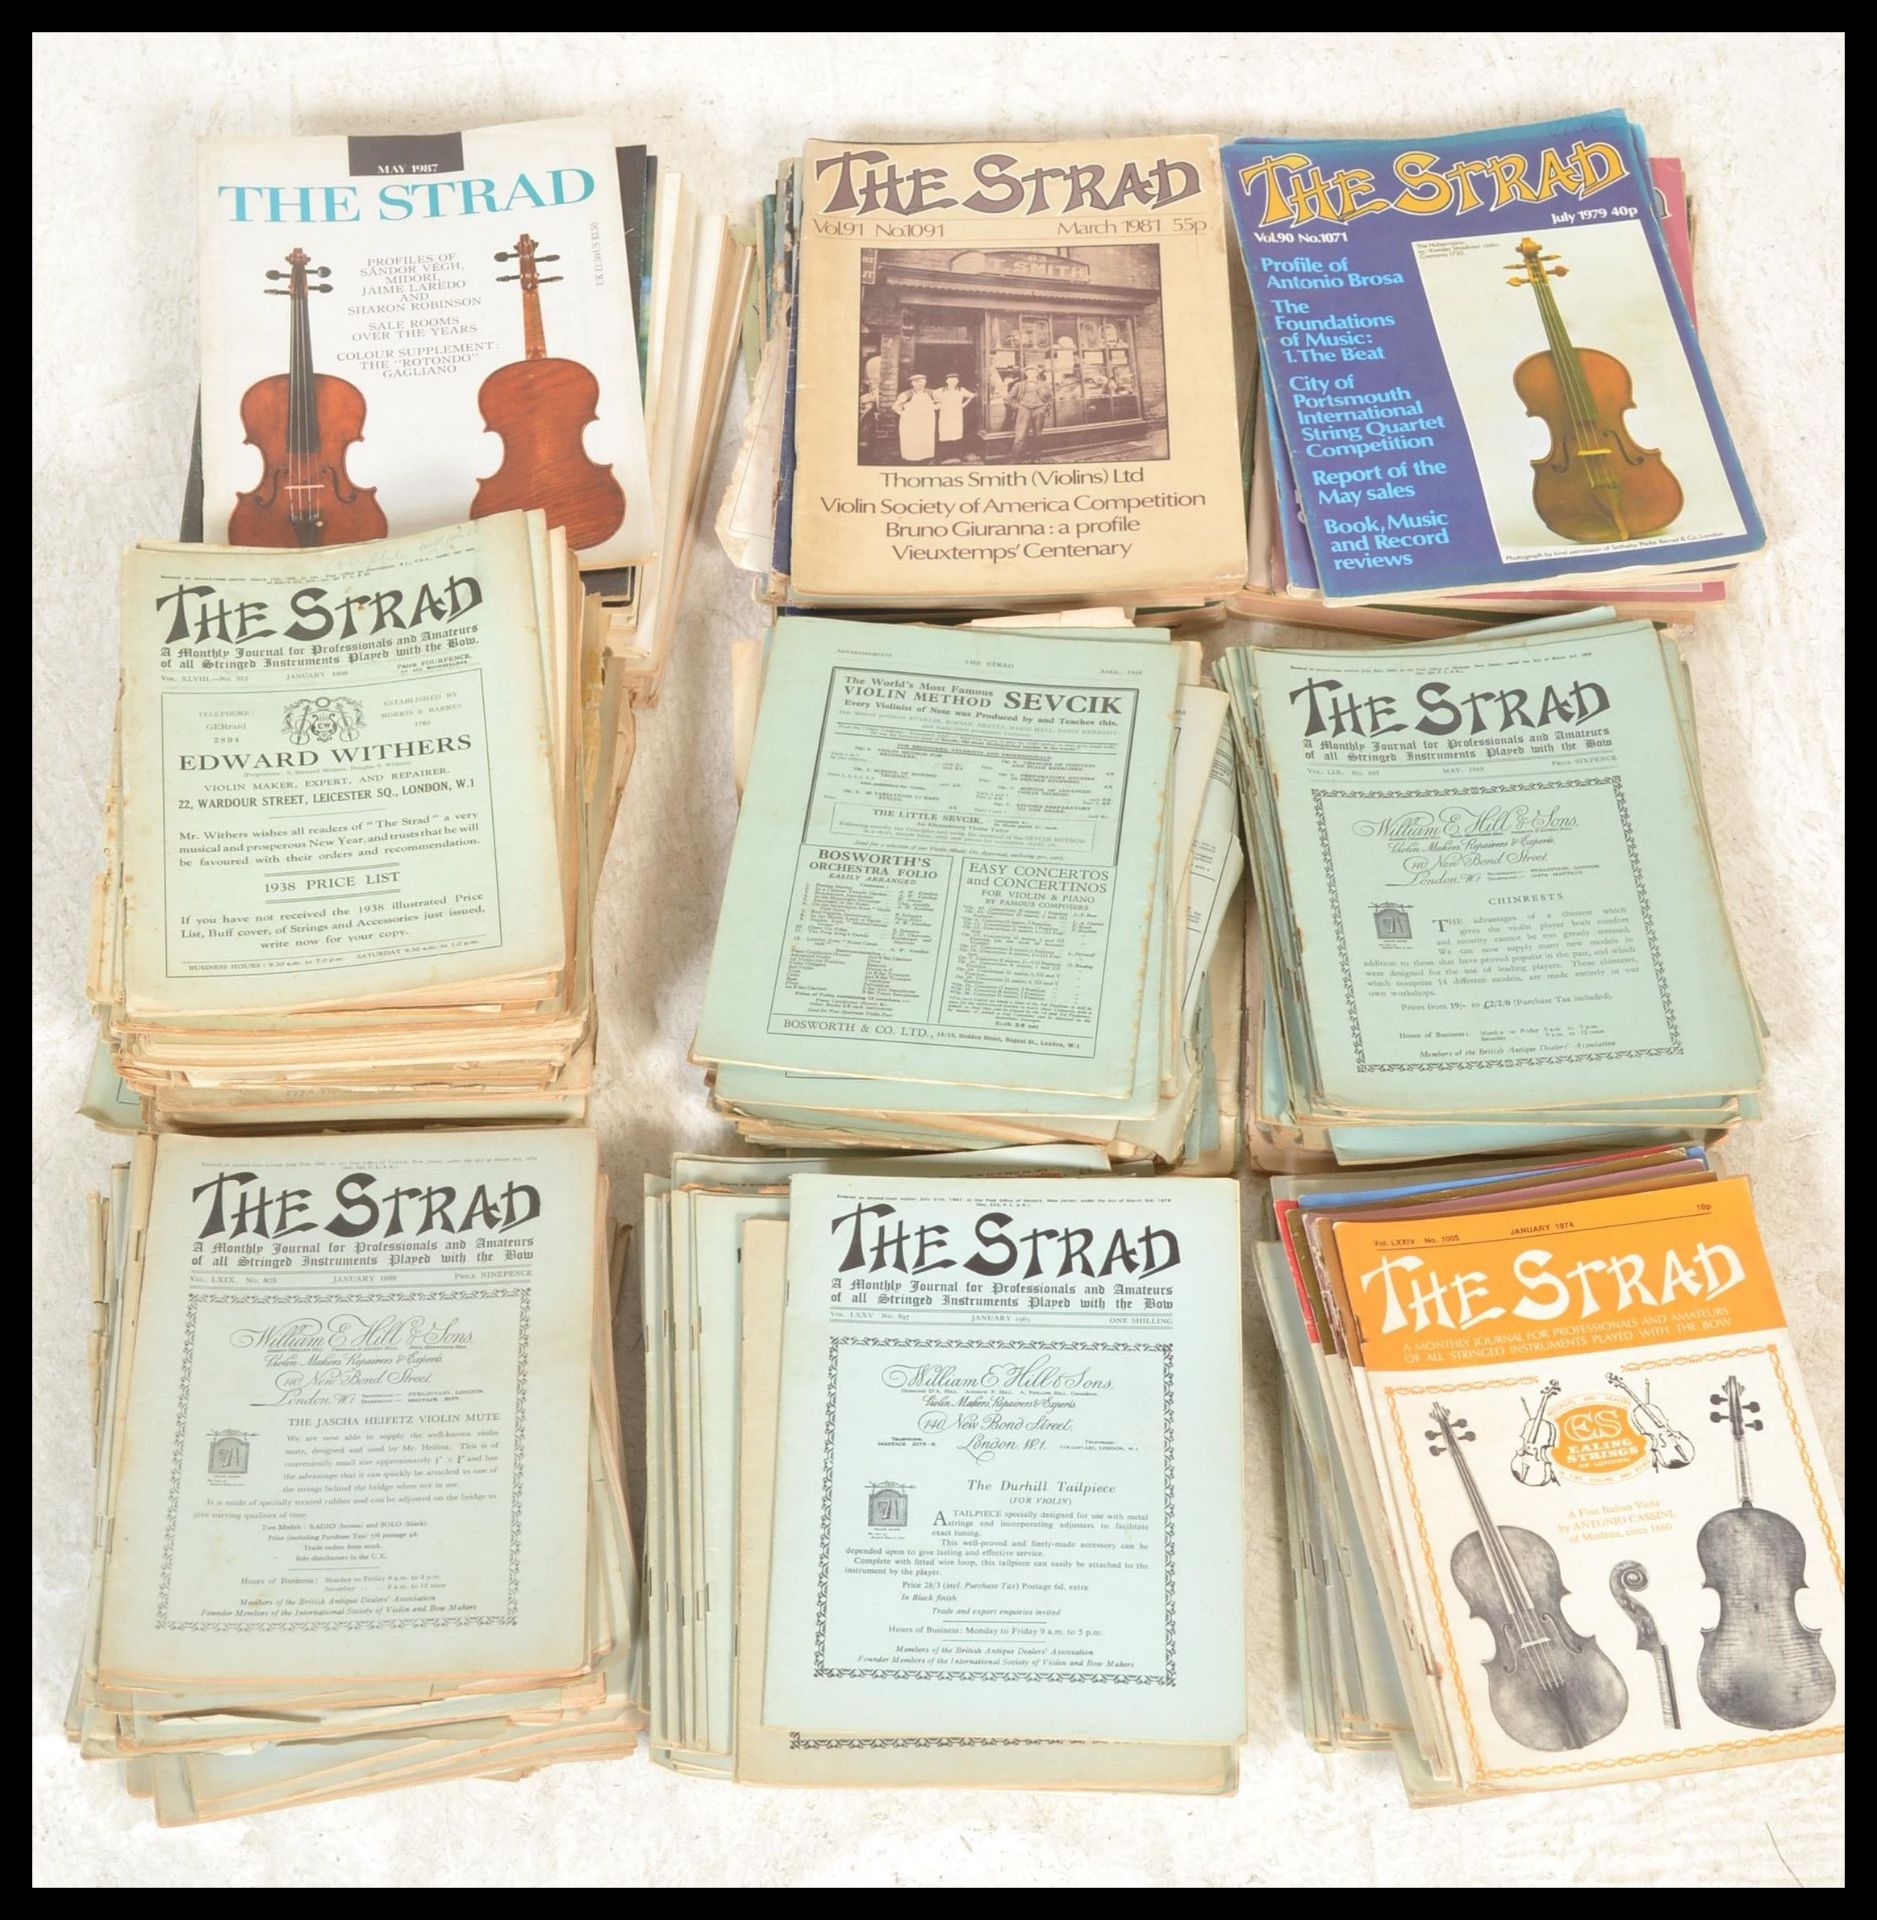 A collection of 20th Century Strad magazines dating from the 1920's through to the 1980's. The